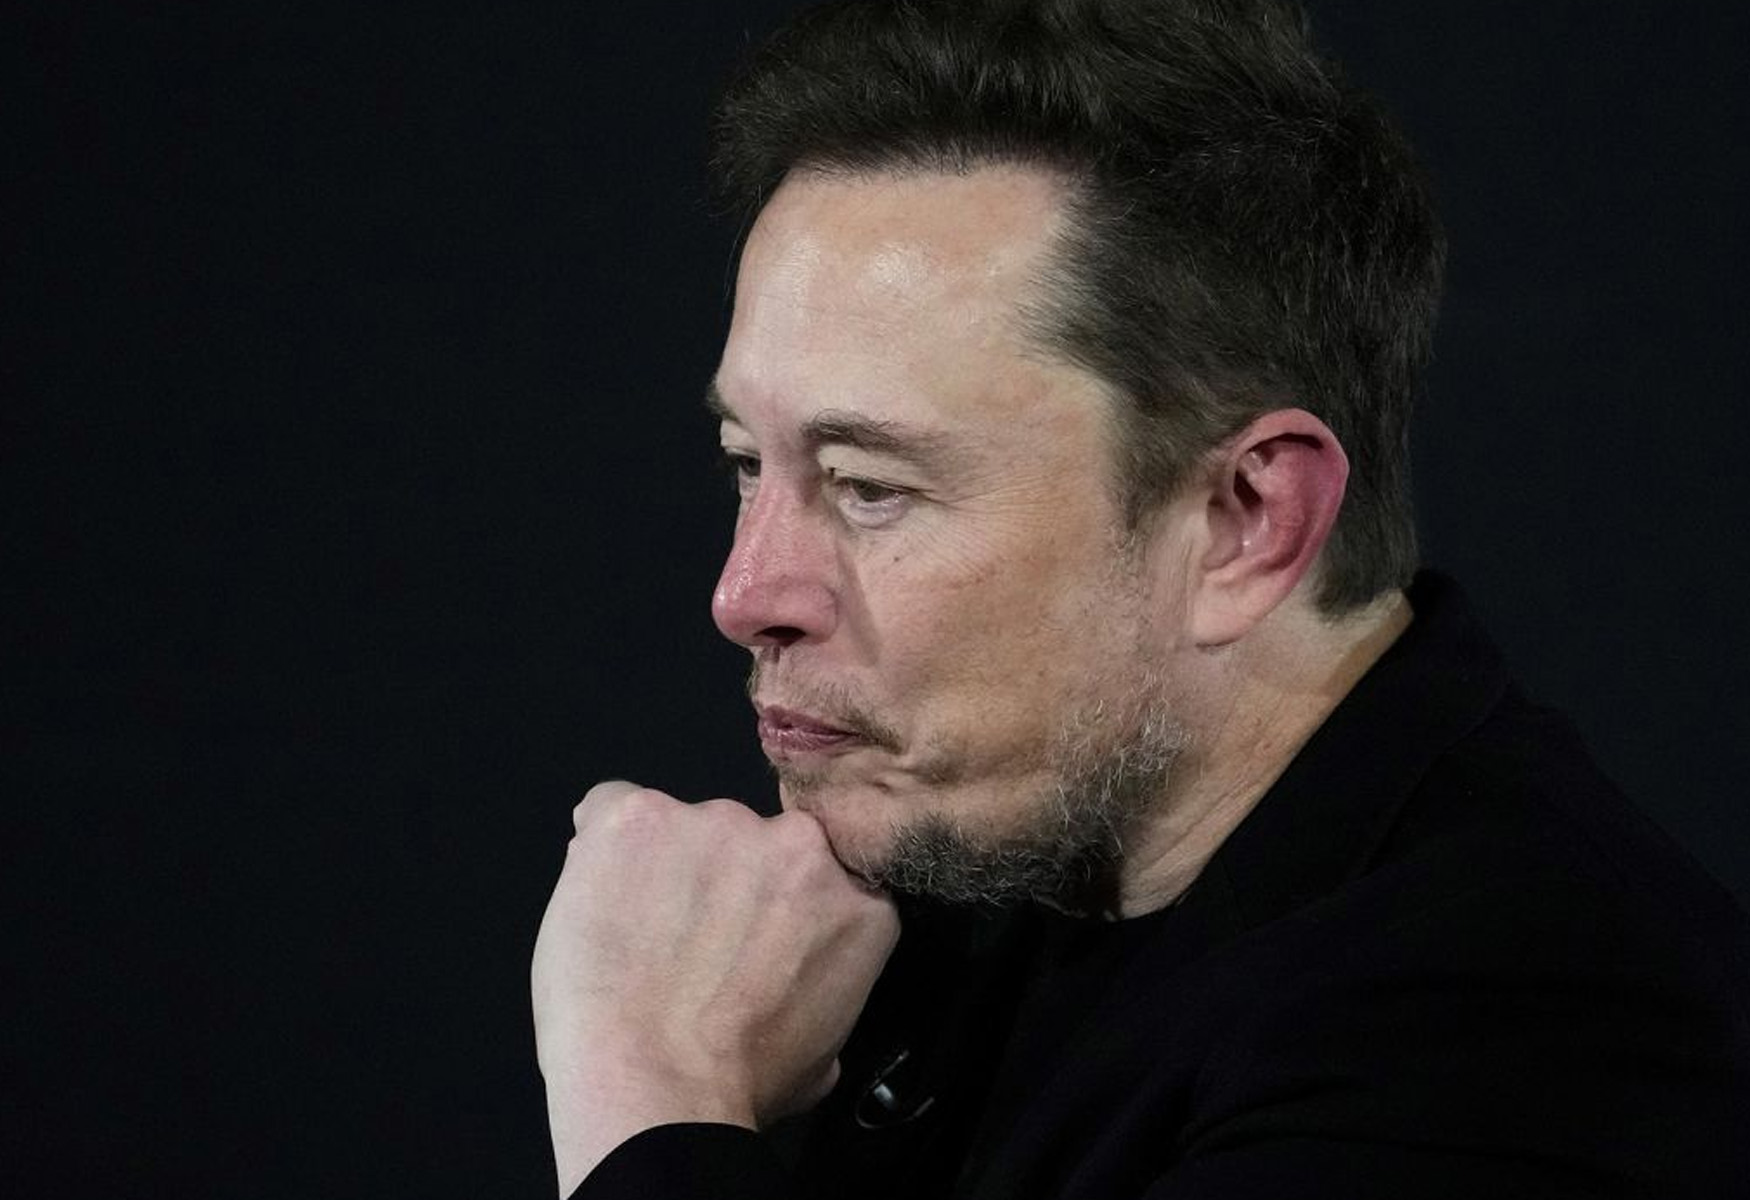 elon-musks-diminishing-influence-the-decline-of-a-tech-icon